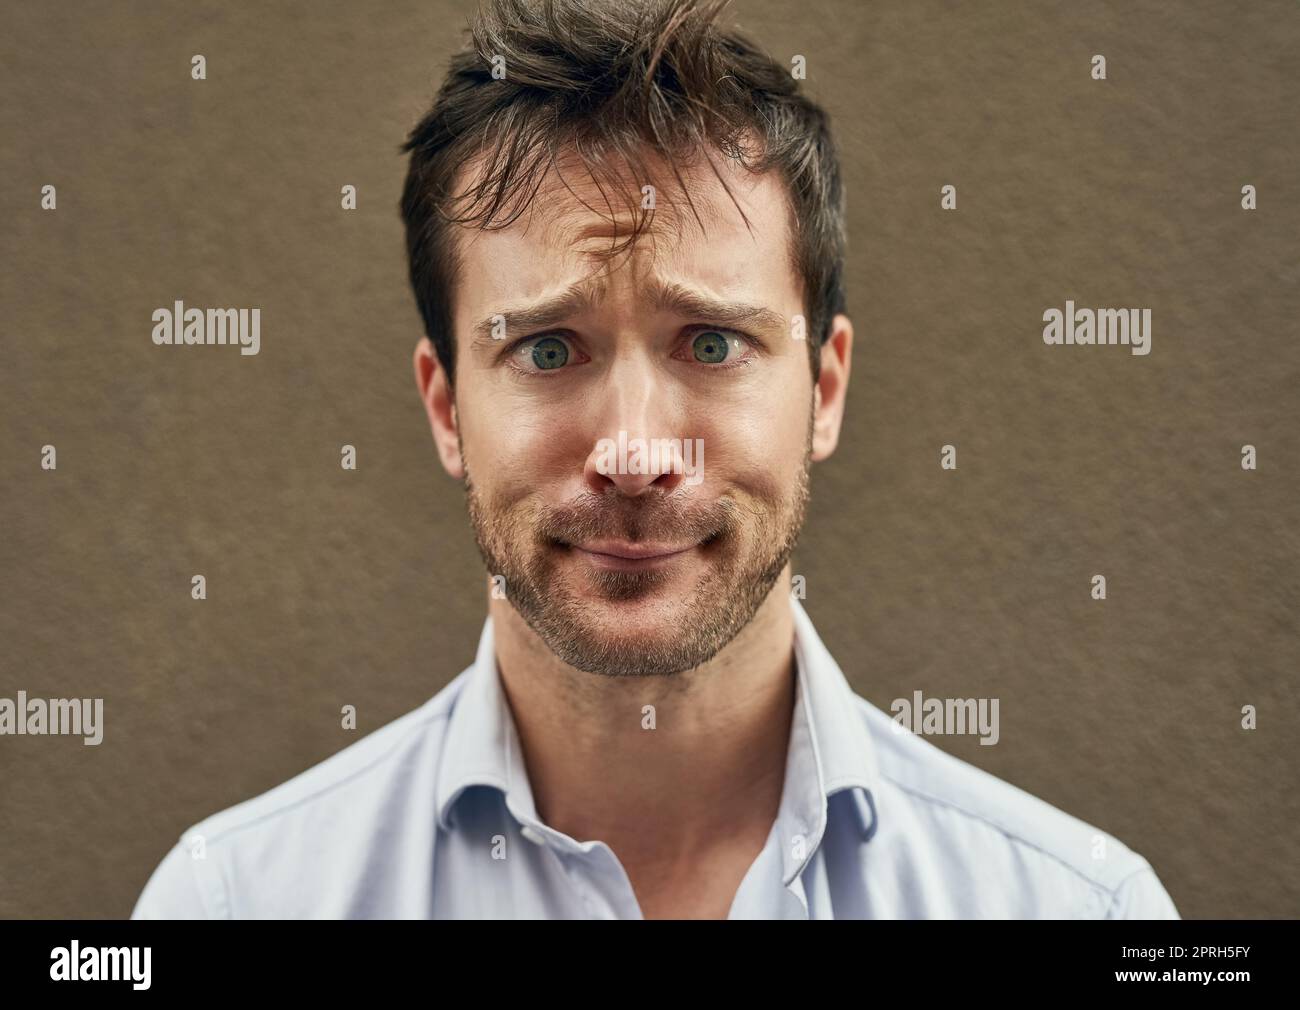 Hes a real standout. Portrait of a young man pulling a funny face against a dark background. Stock Photo